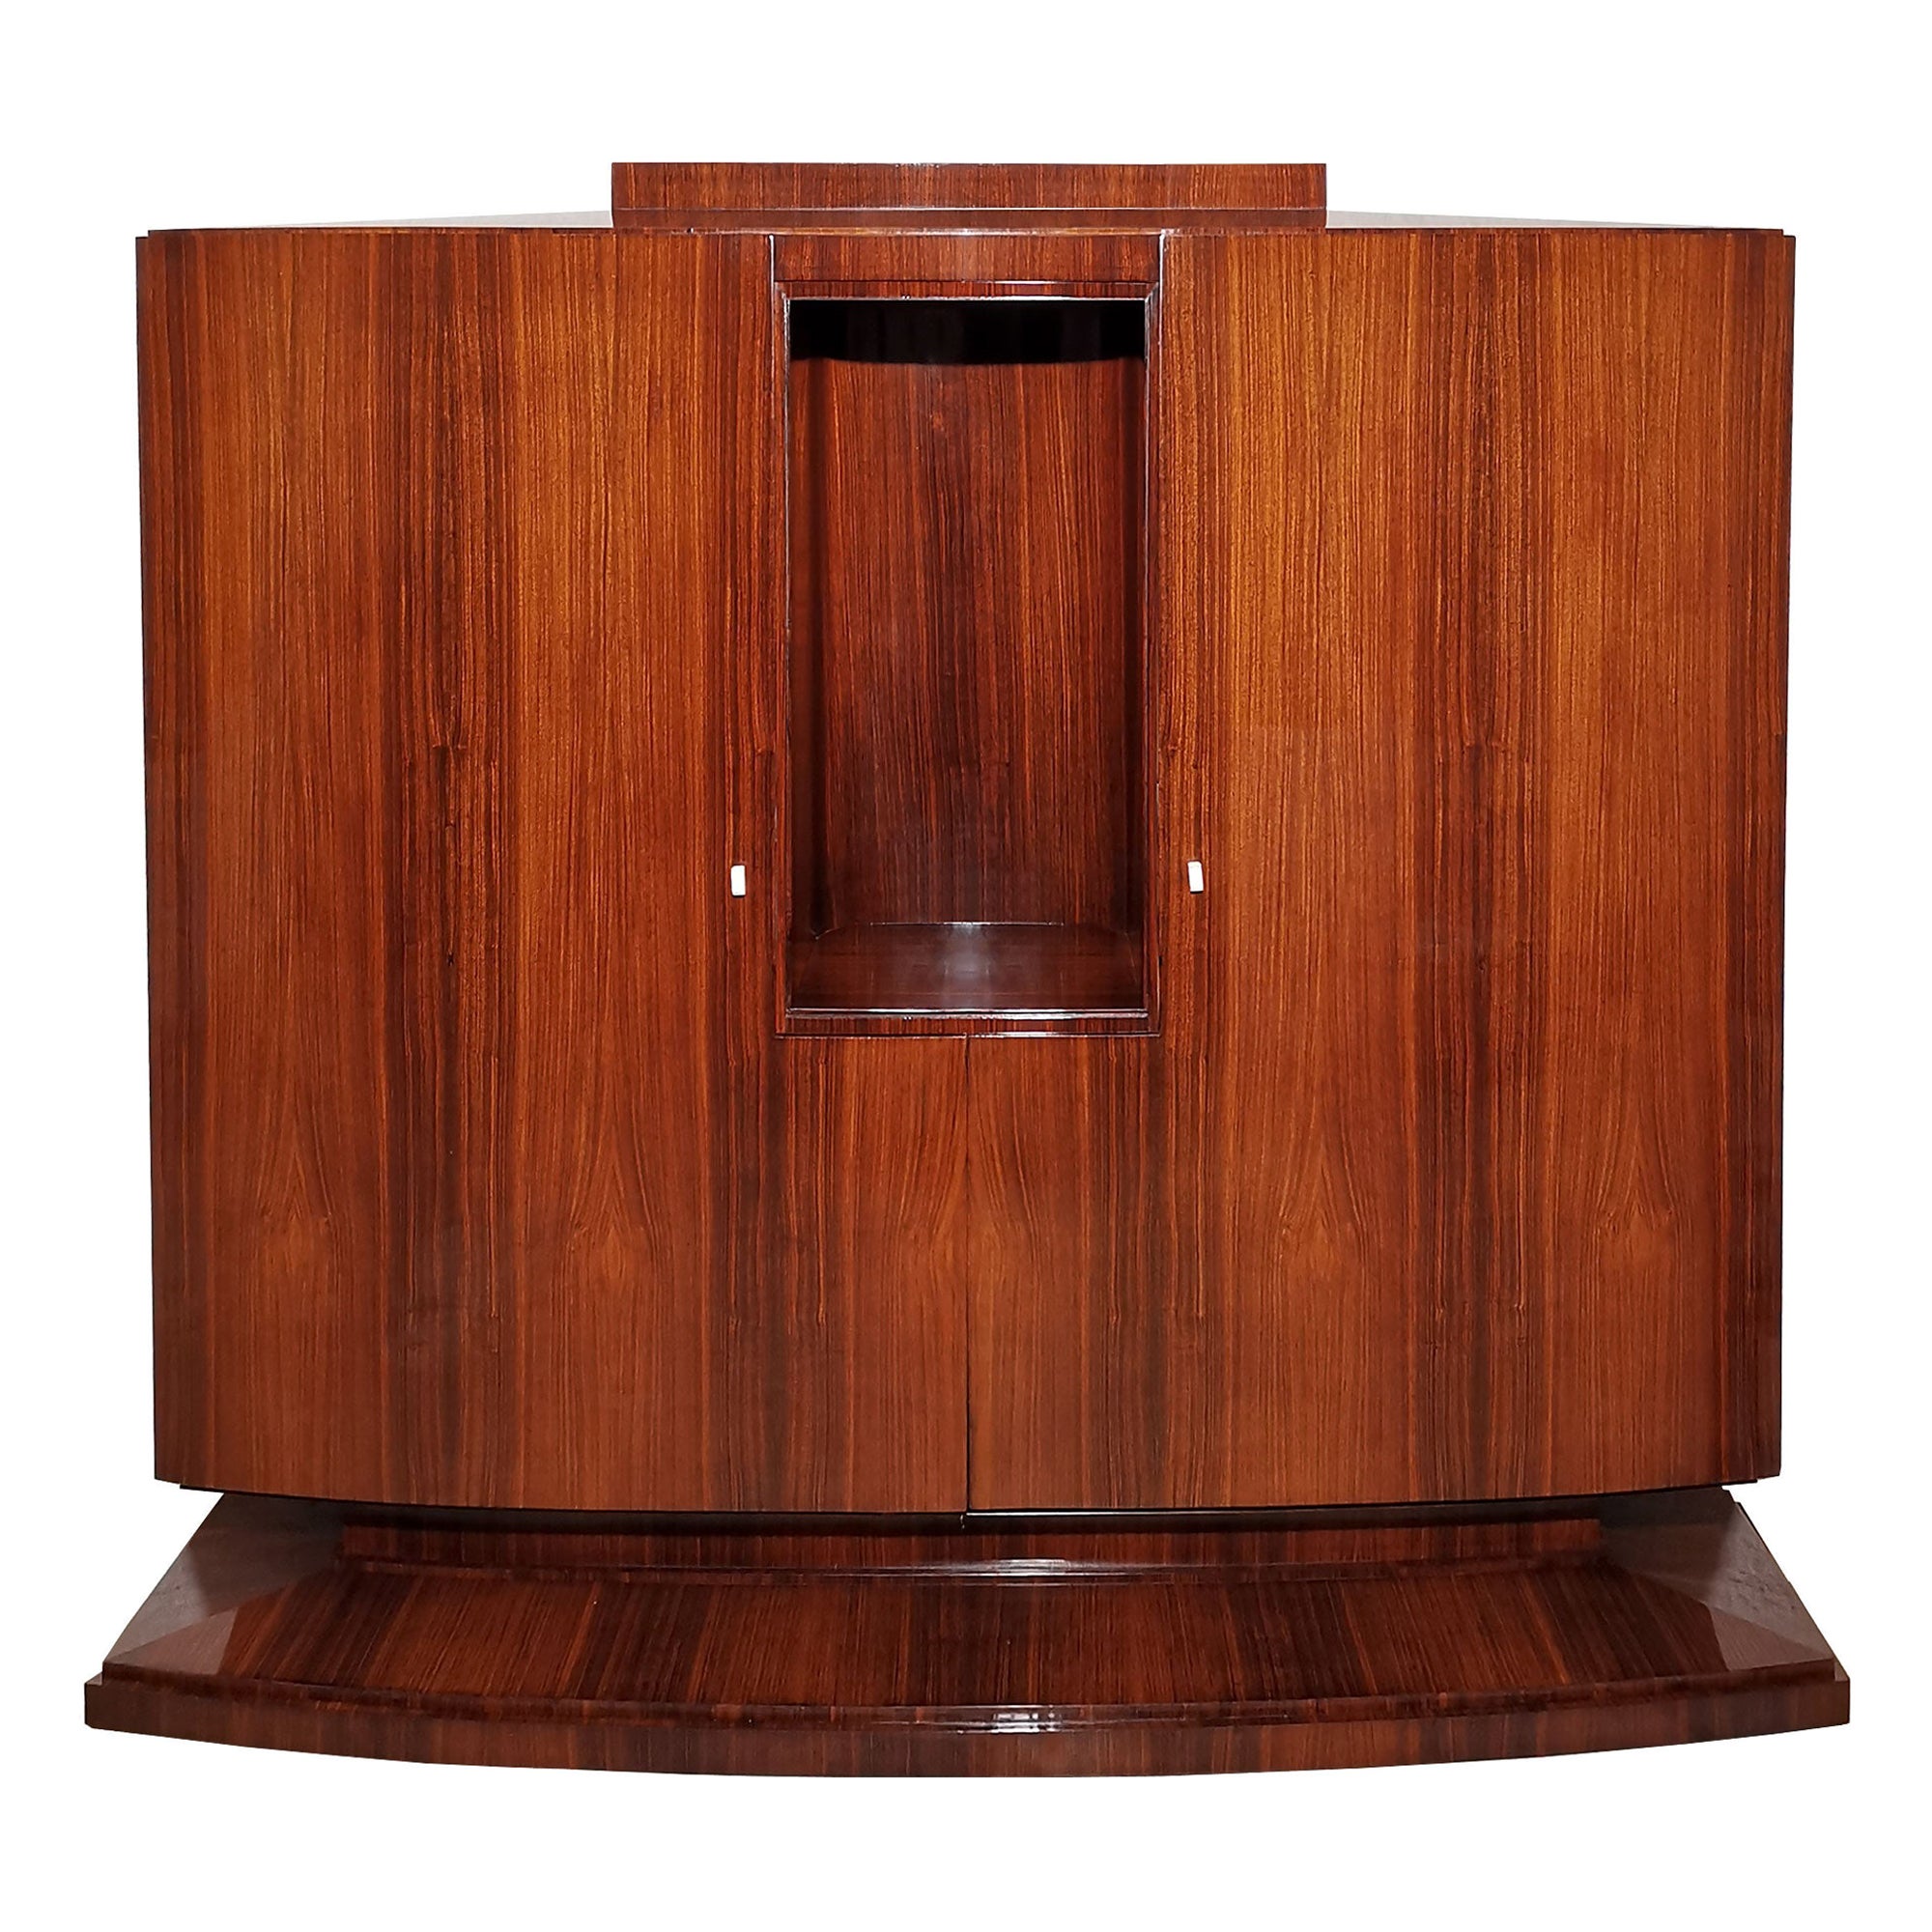 Art Deco Storage Cabinet, Mahogany, Sycamore, Curved Doors, Shelves - France